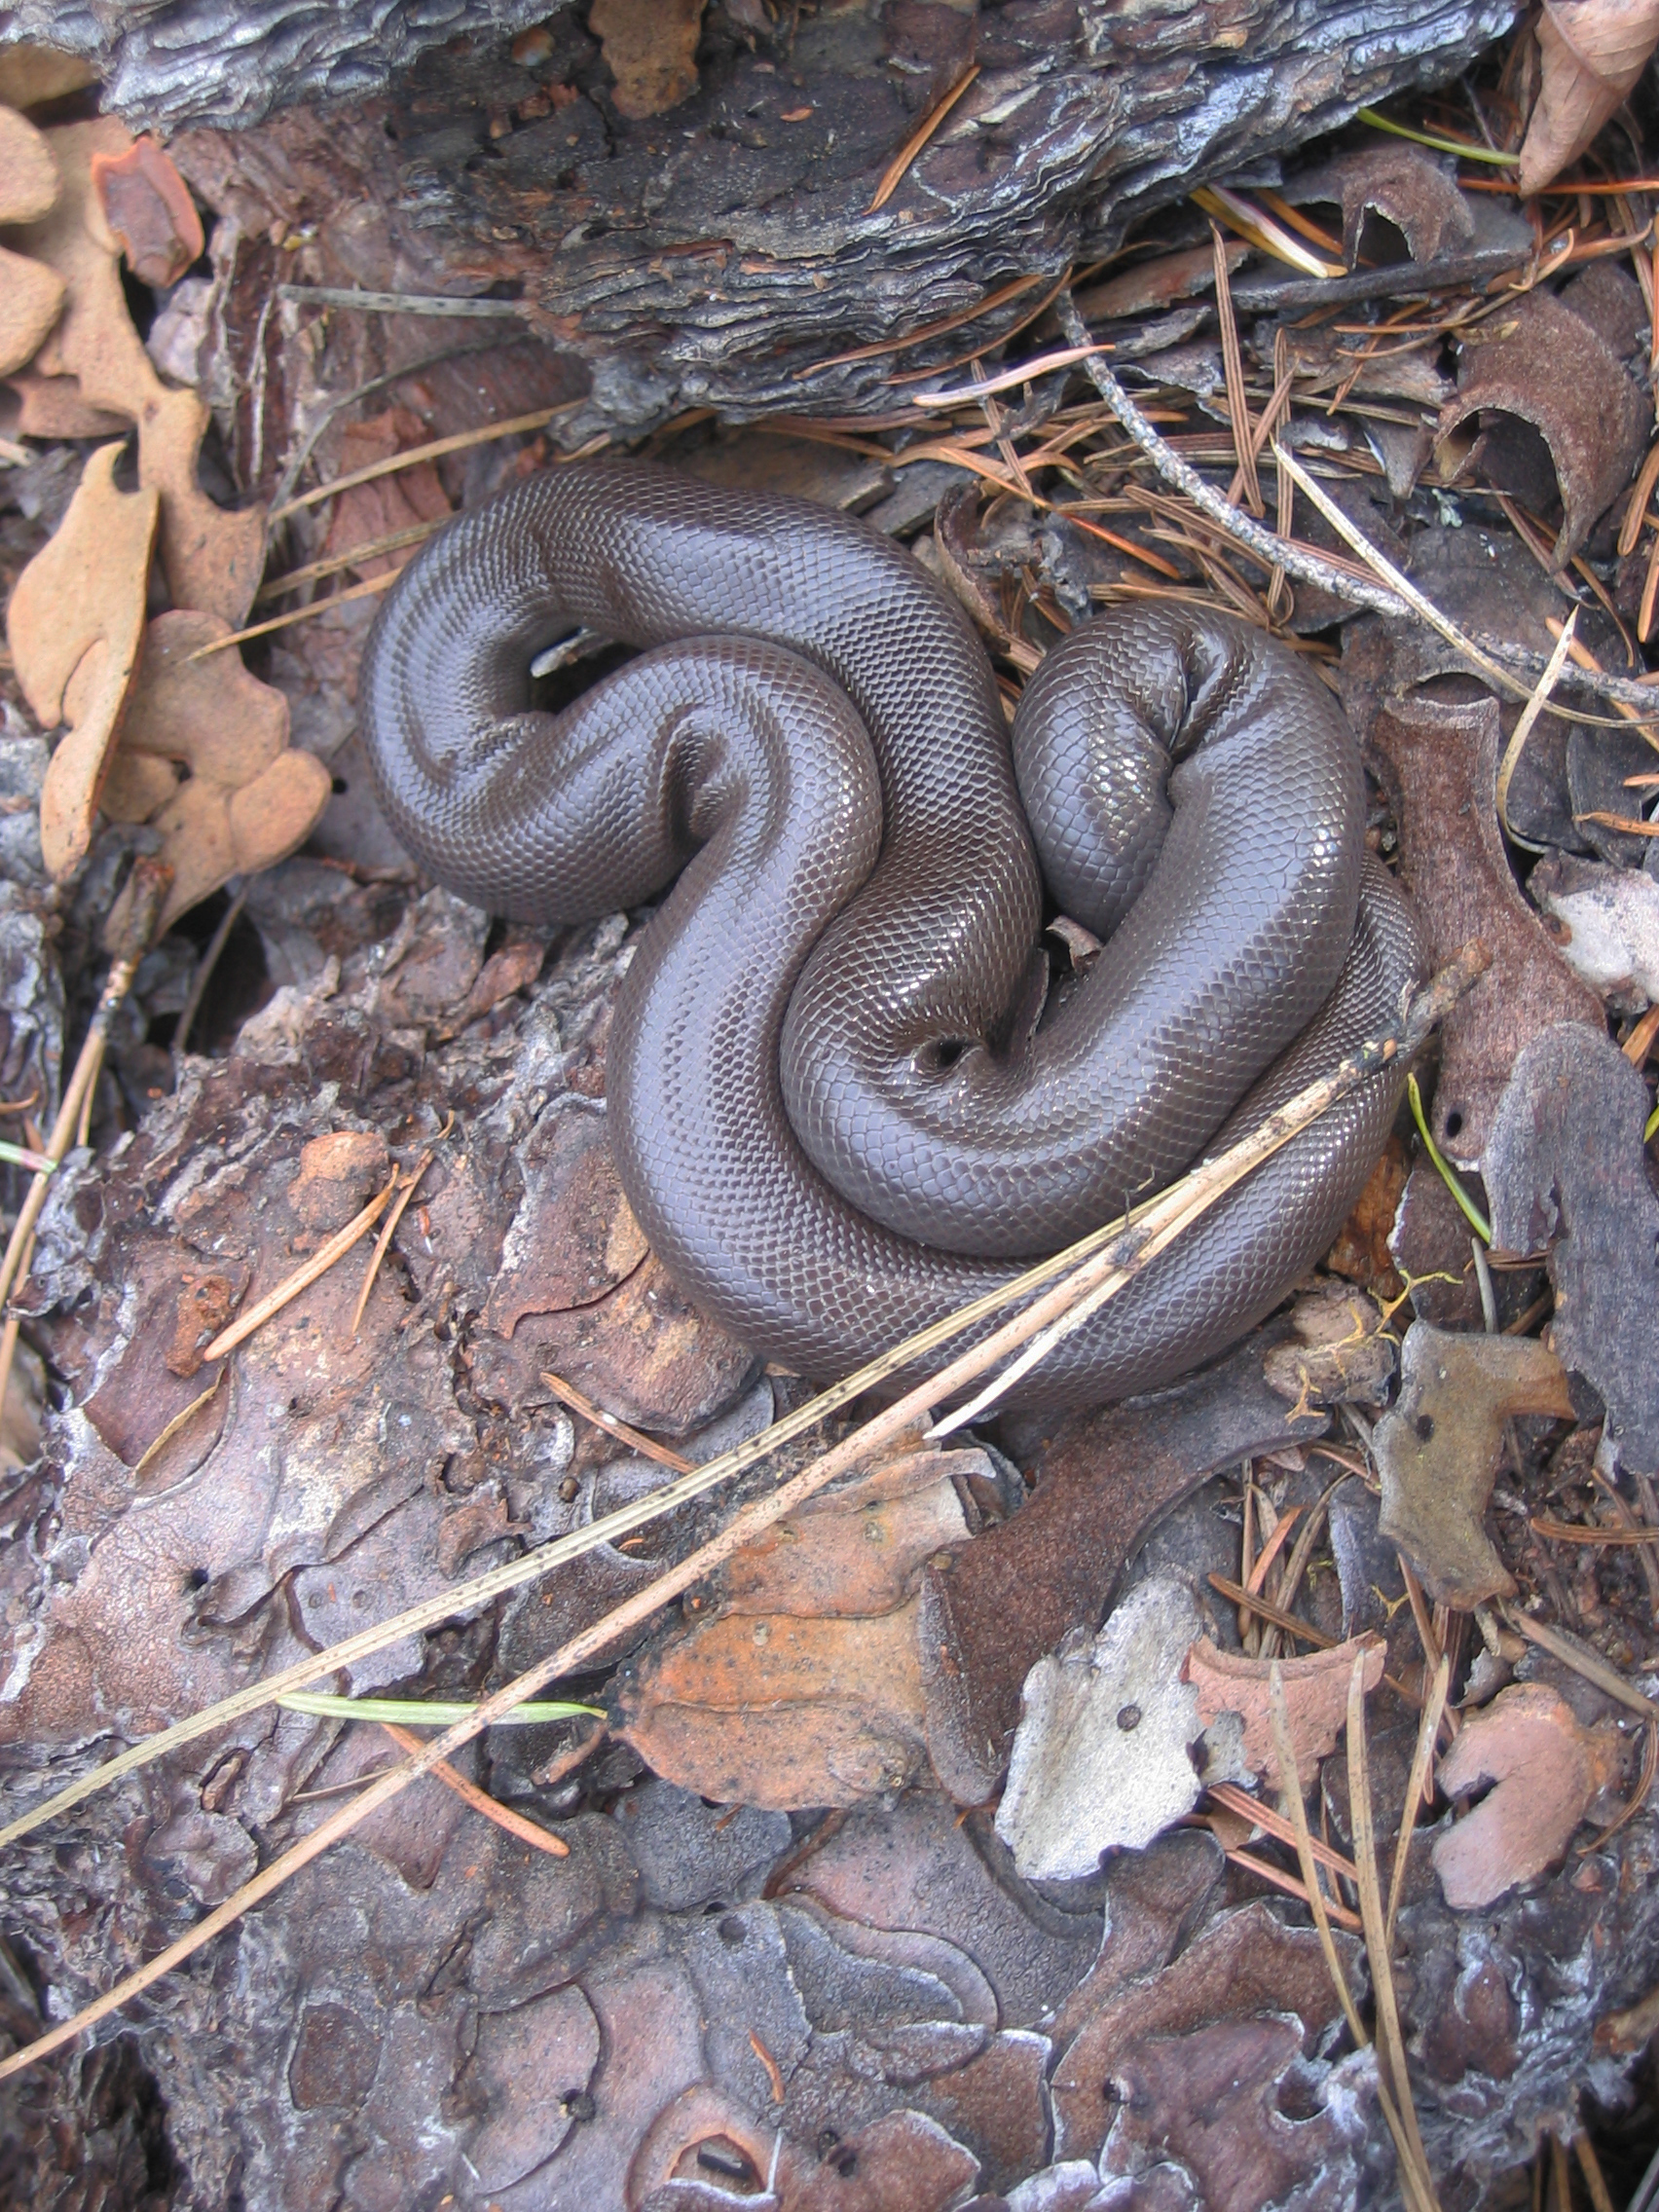 A shiny dark brown snake sits curled up on itself.